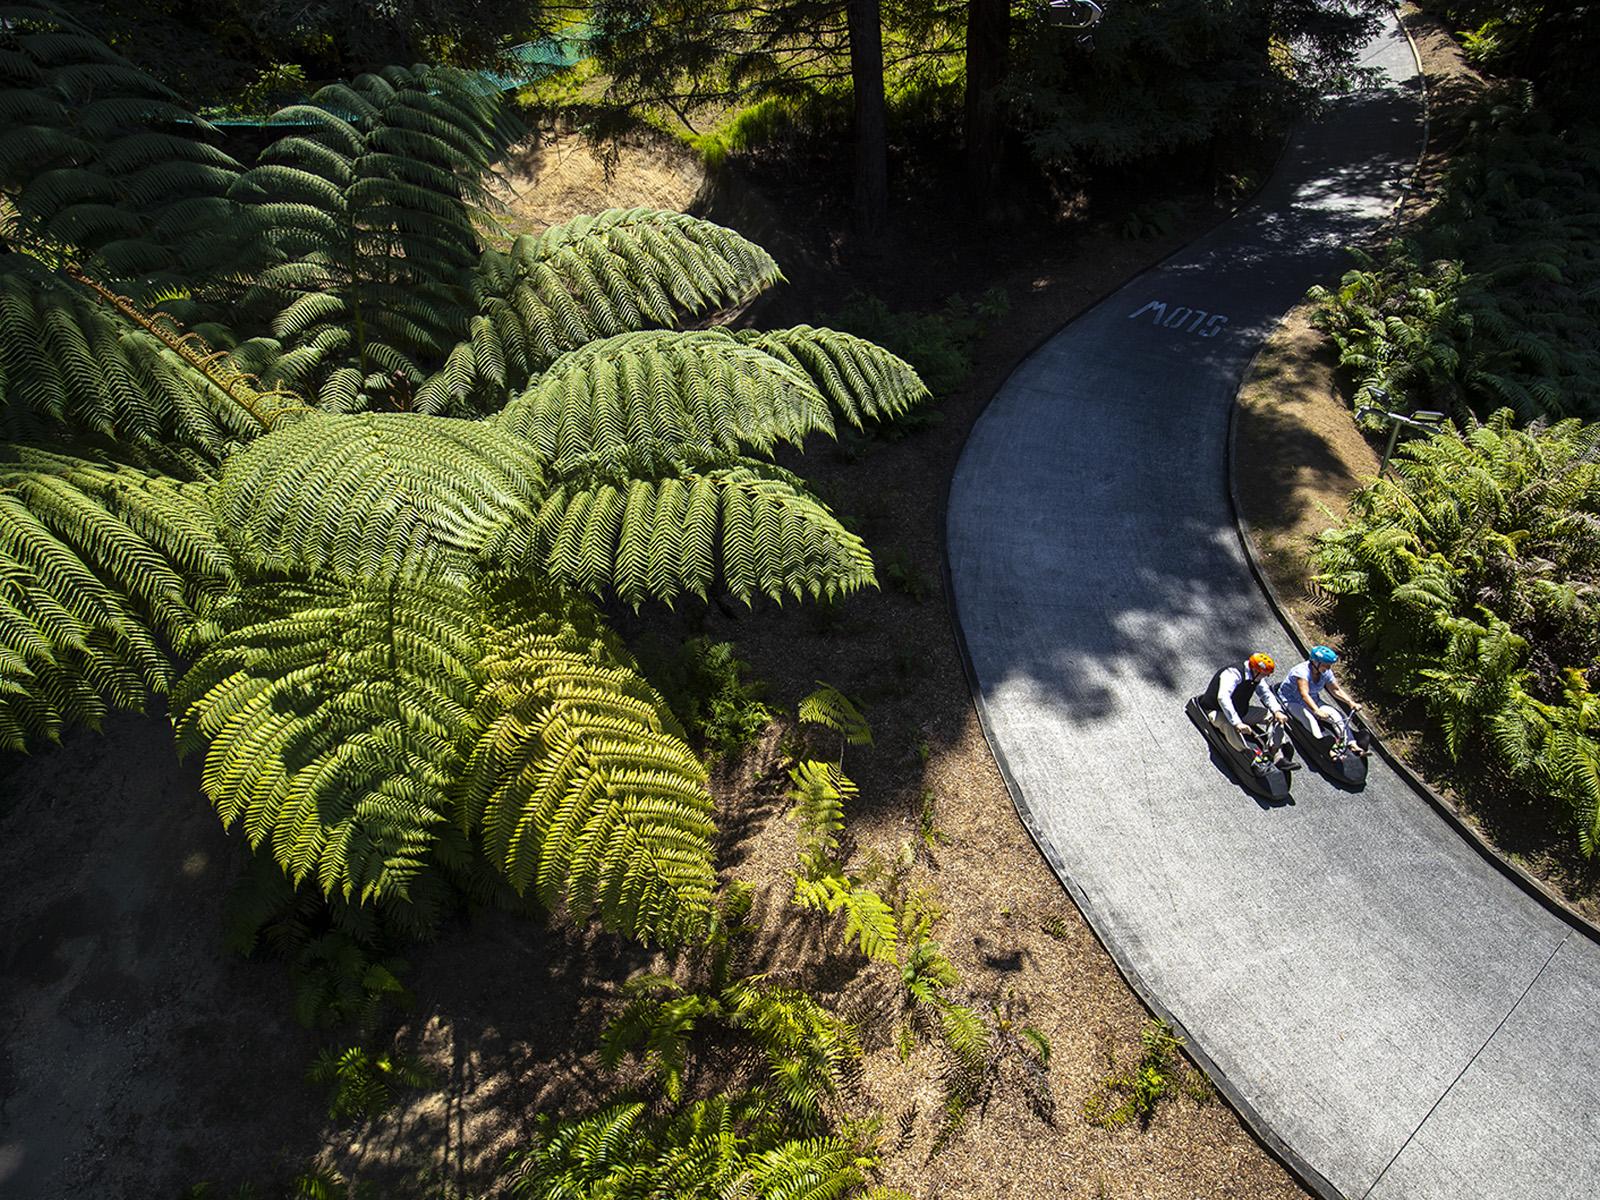 Aerial photo of the luge track with beautiful New Zealand native trees